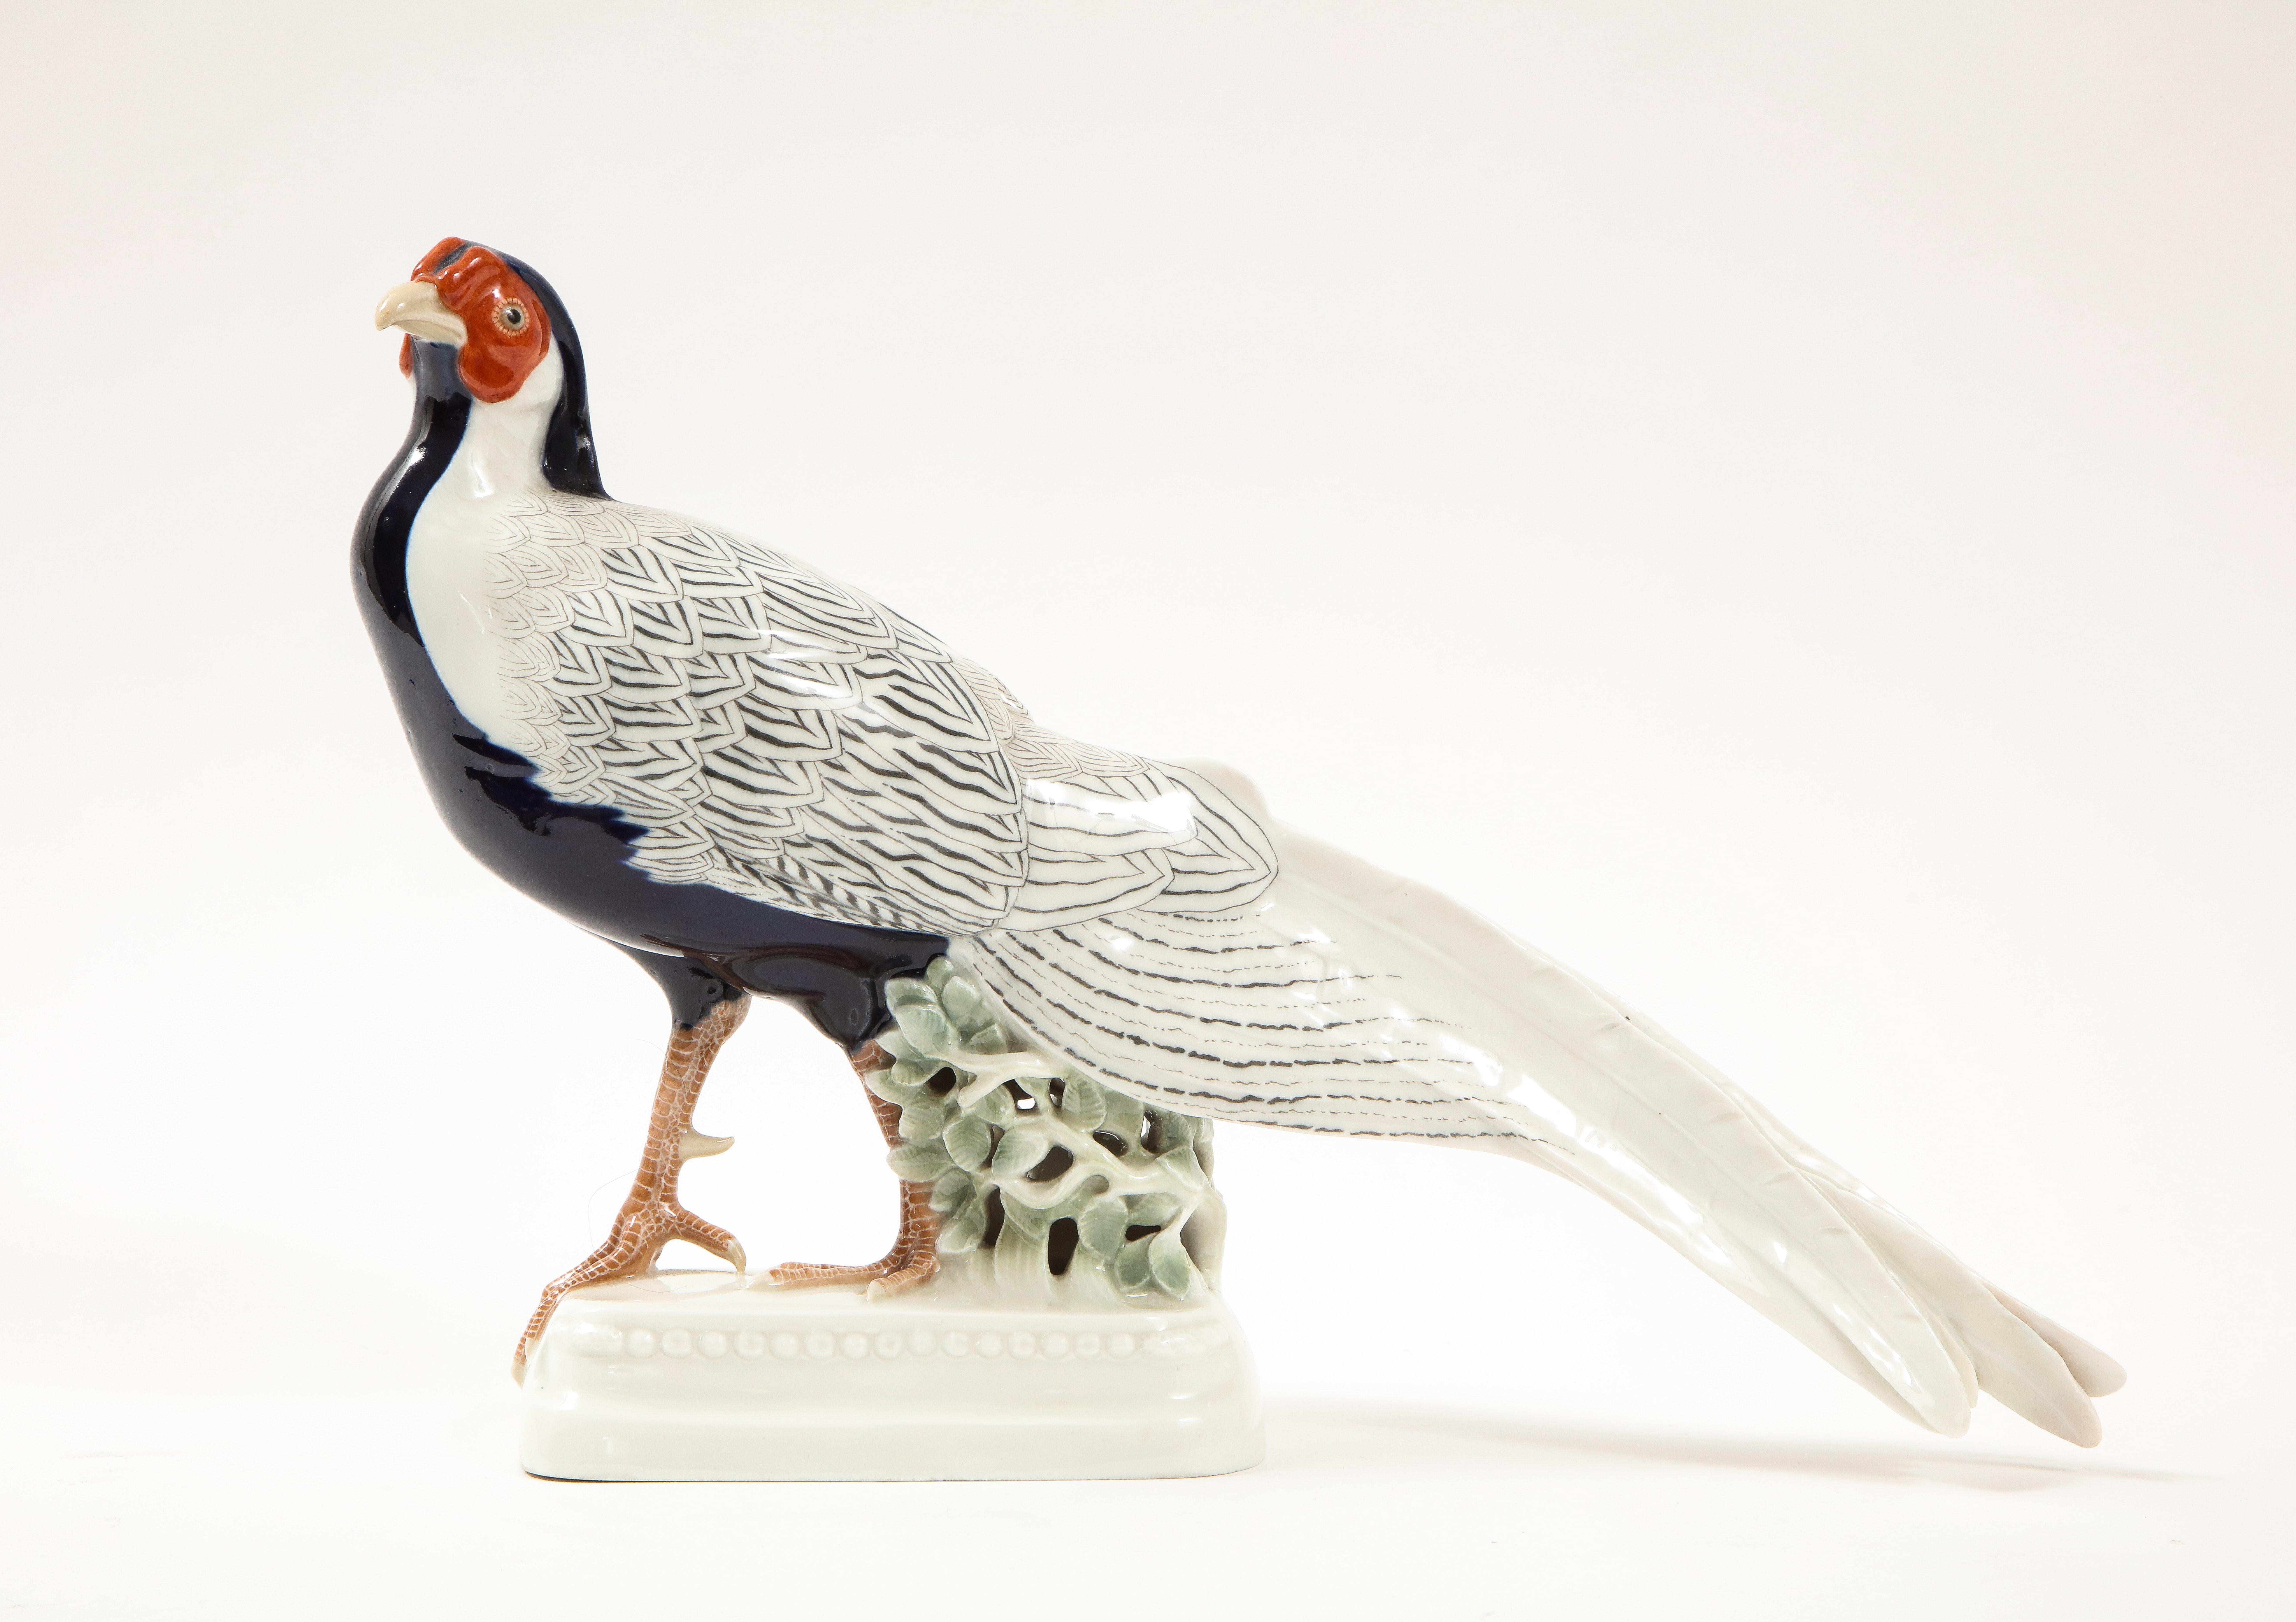 A Large and Fine Quality 20th Century Meissen Porcelain Model of a Silver Feathered Pheasant, Modeled by Max Bochmann in 1909/1910. This pheasant is beautifully hand-made and hand-painted by the best Meissen artists of the time. The feathers are all